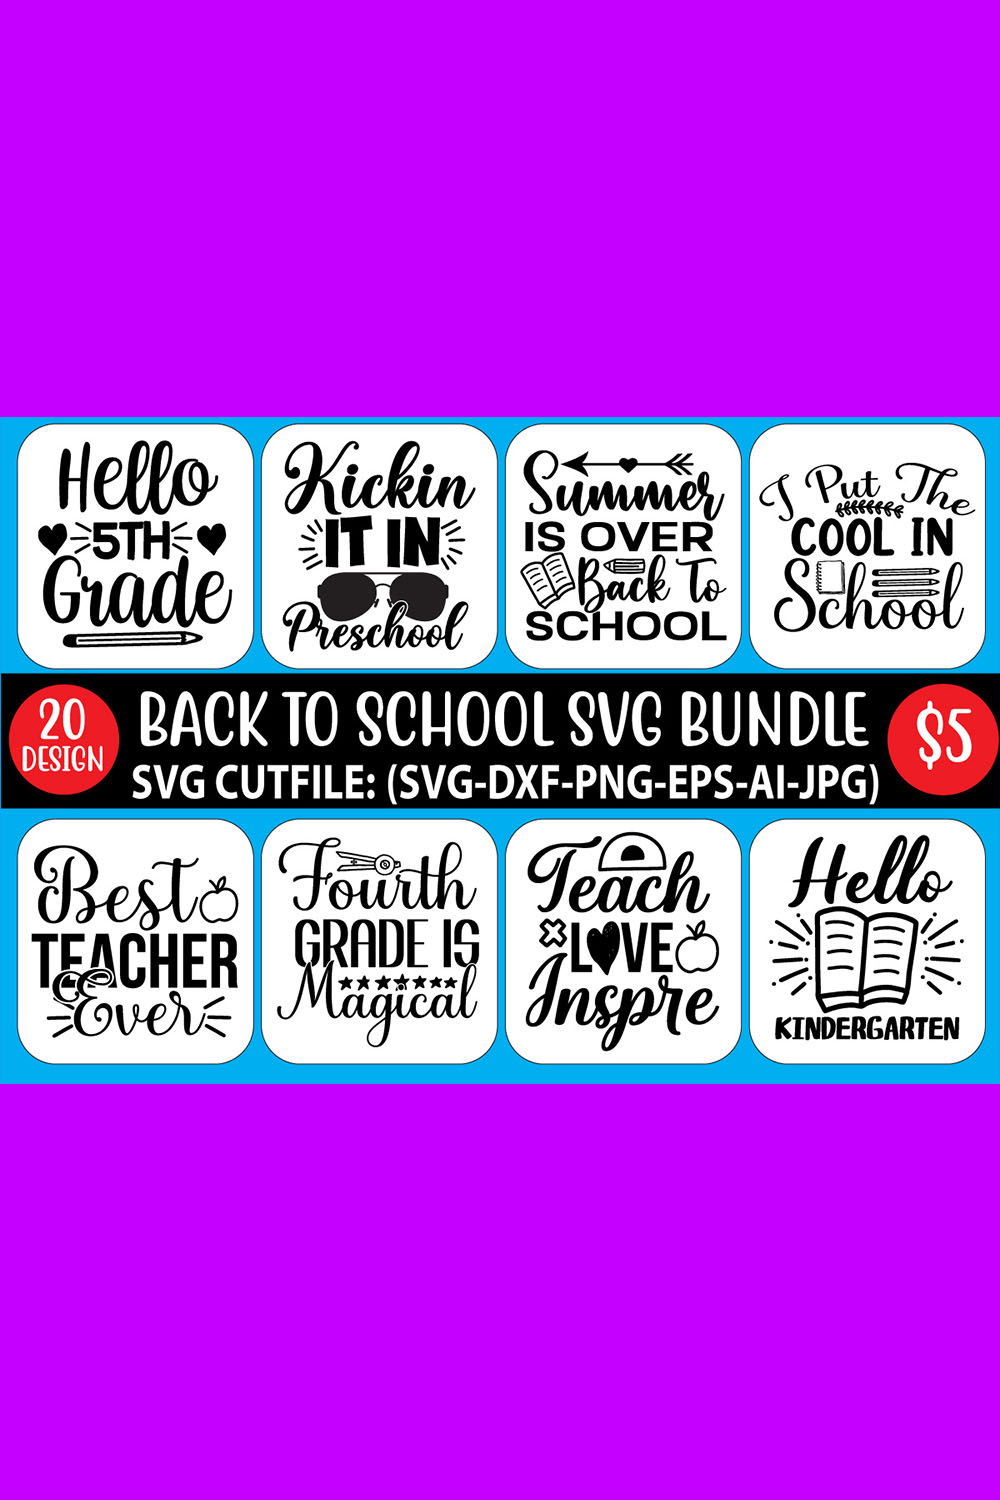 Bundle of amazing images for school-themed prints